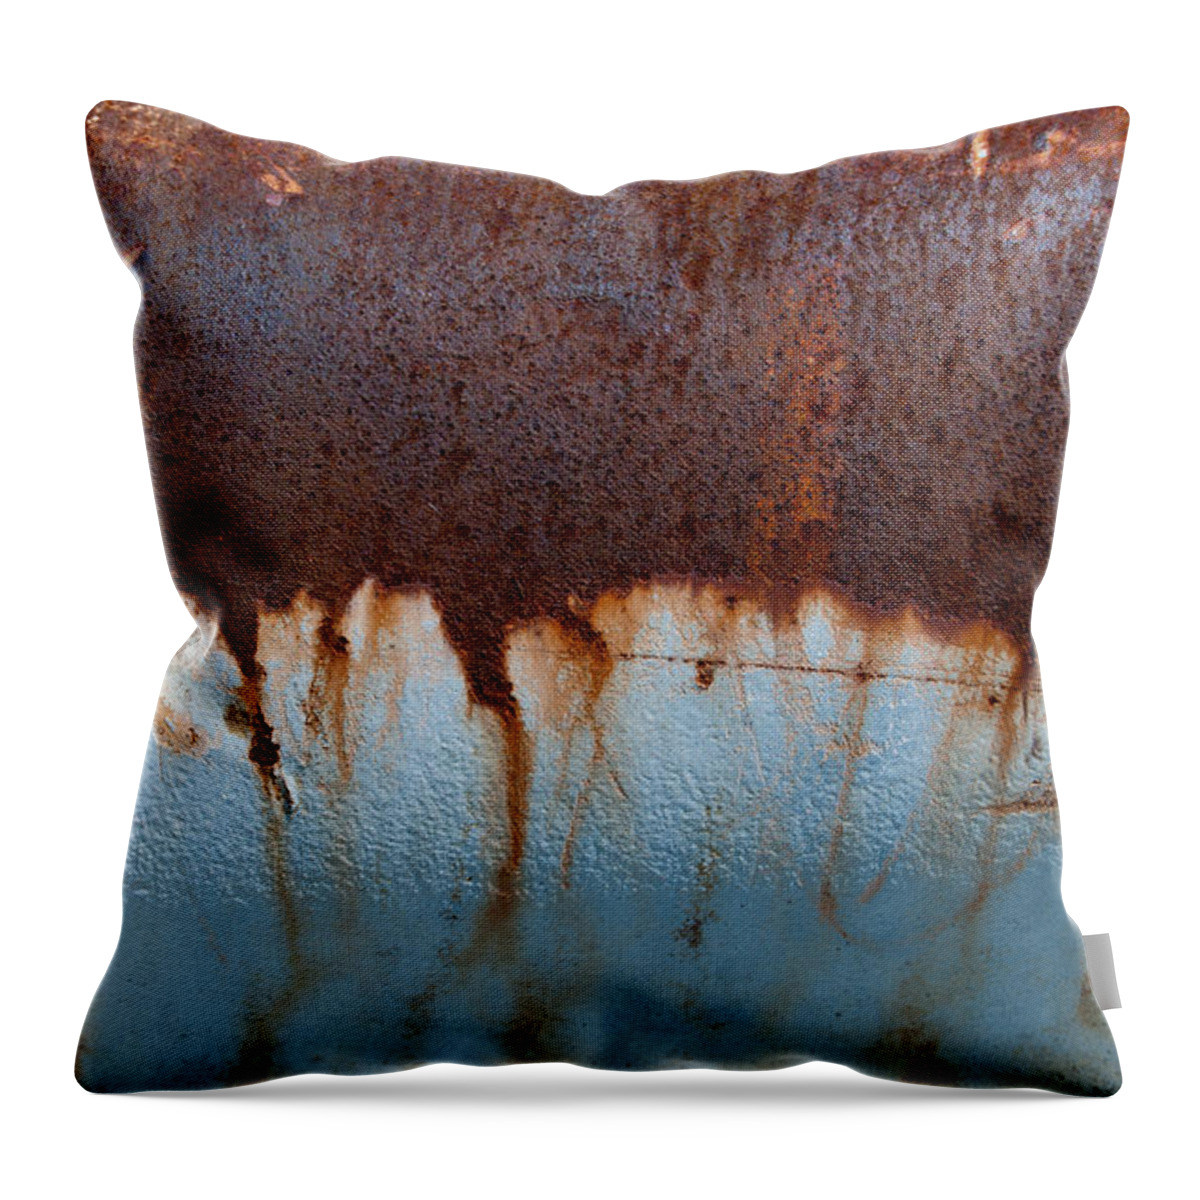 Industrial Throw Pillow featuring the photograph Acid Rain by Jani Freimann